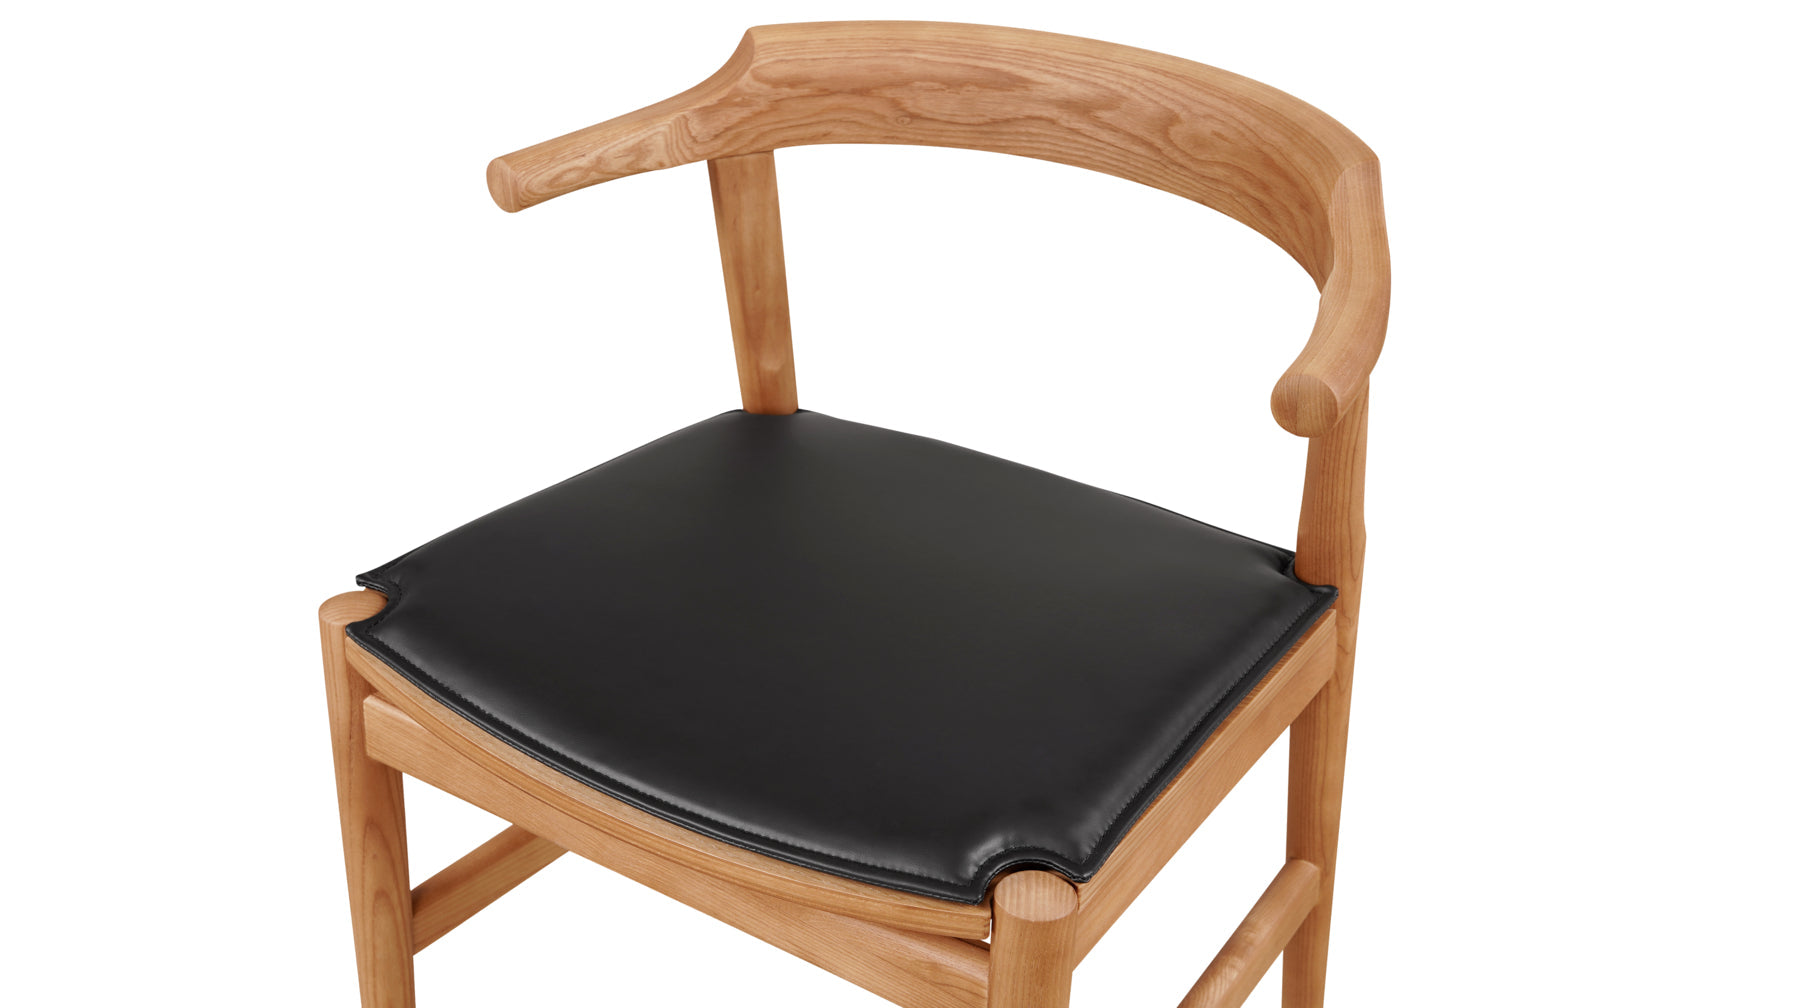 Tuck In Dining Chair with Cushion, White Oak, Wood Seat with Black Cushion - Image 6